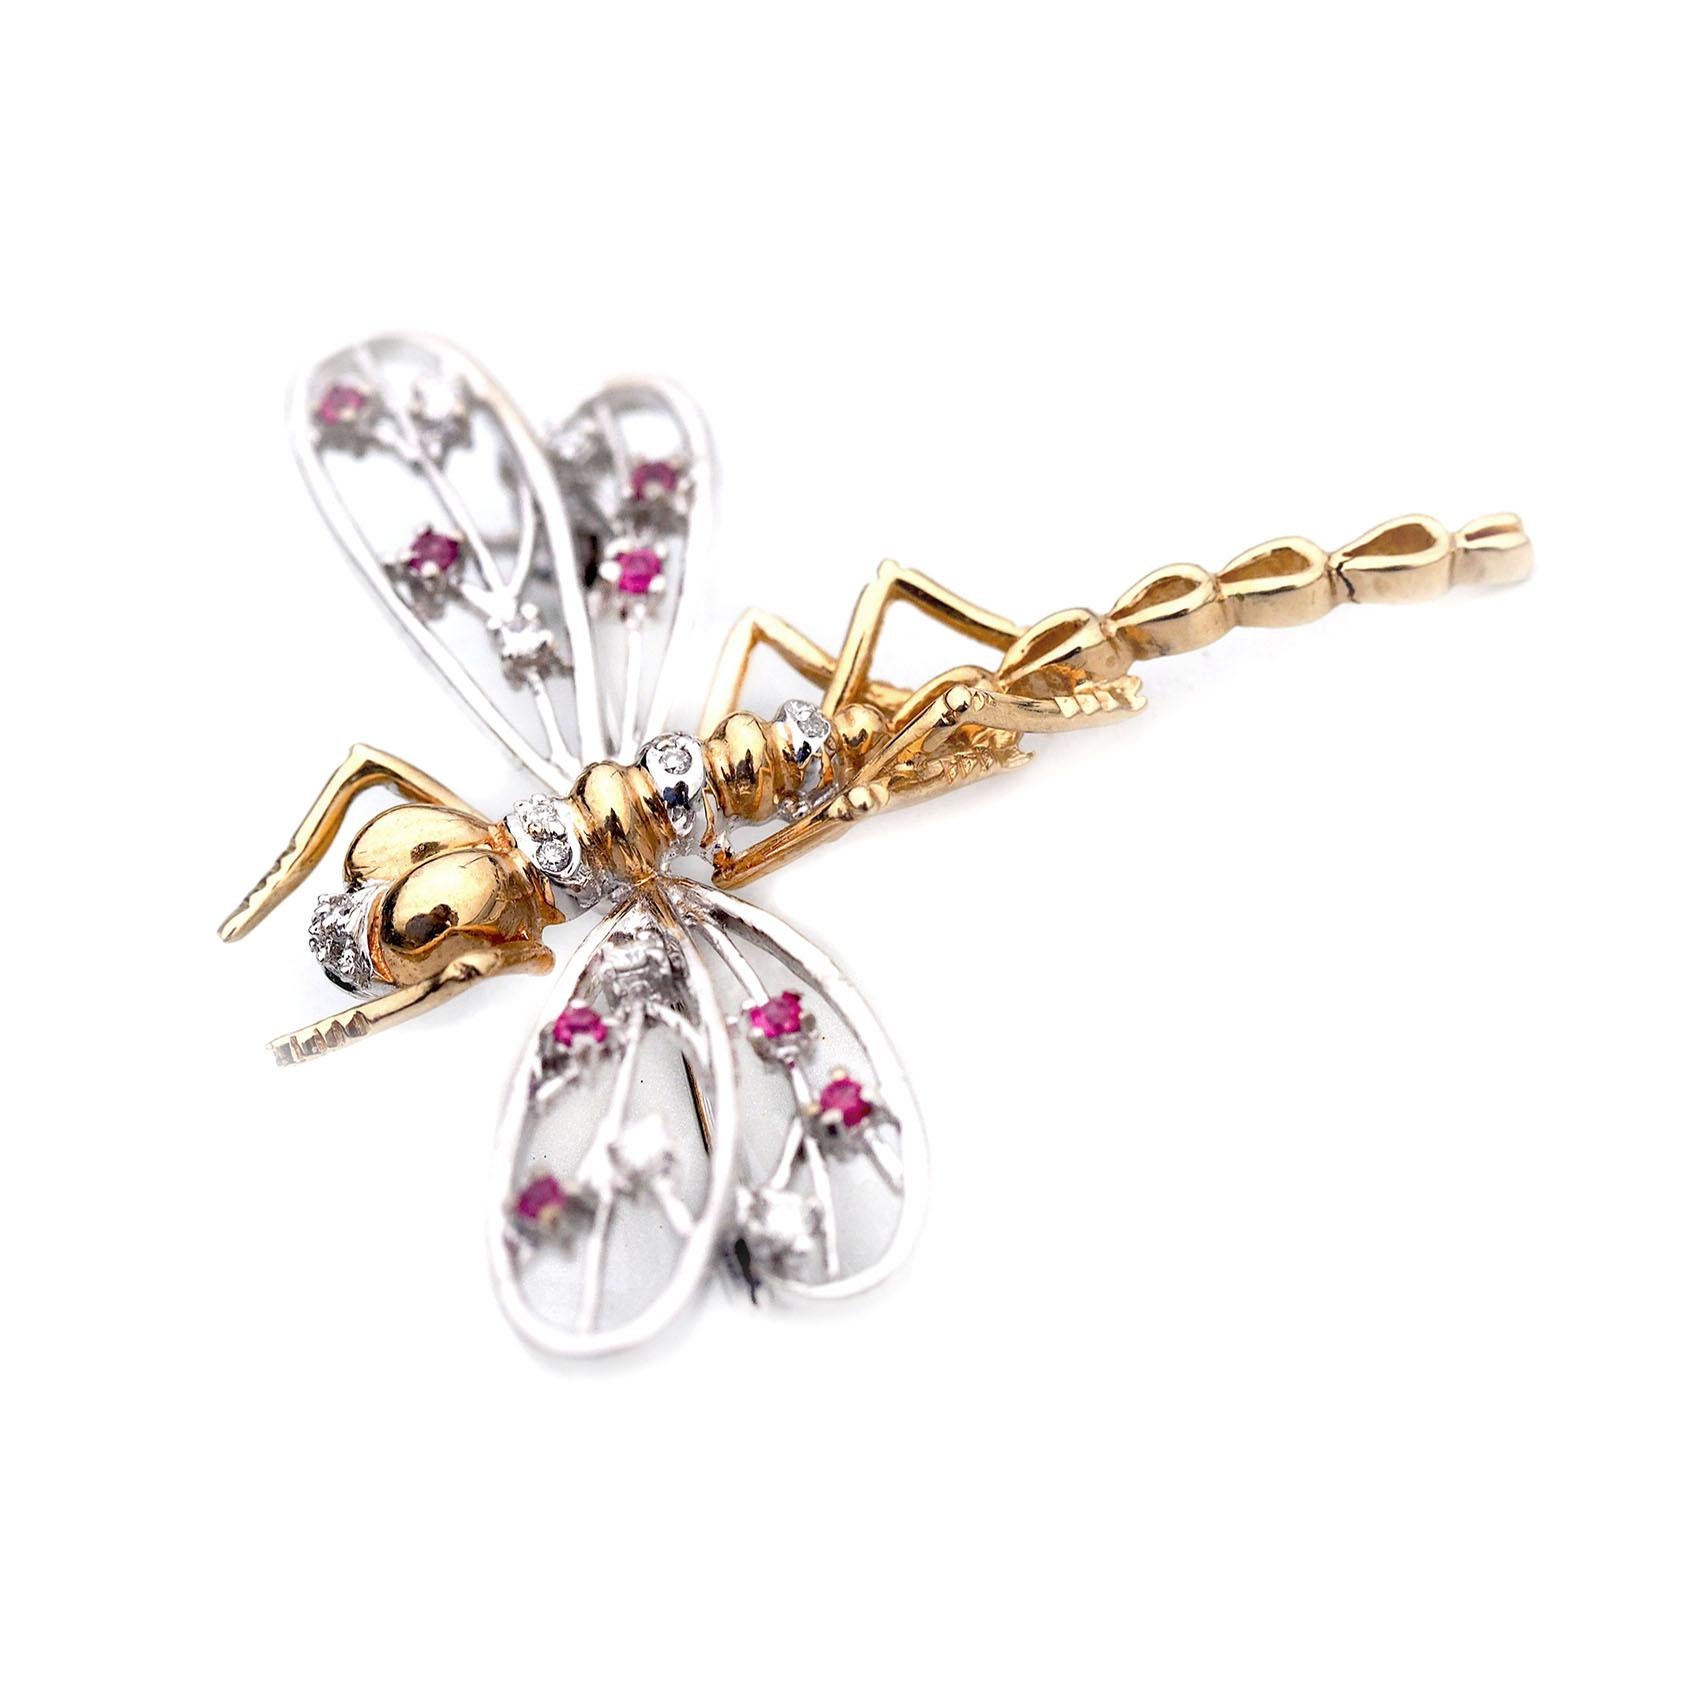 Women's or Men's 14 Karat Yellow and White Gold Dragonfly Pin with Rubies and Diamonds